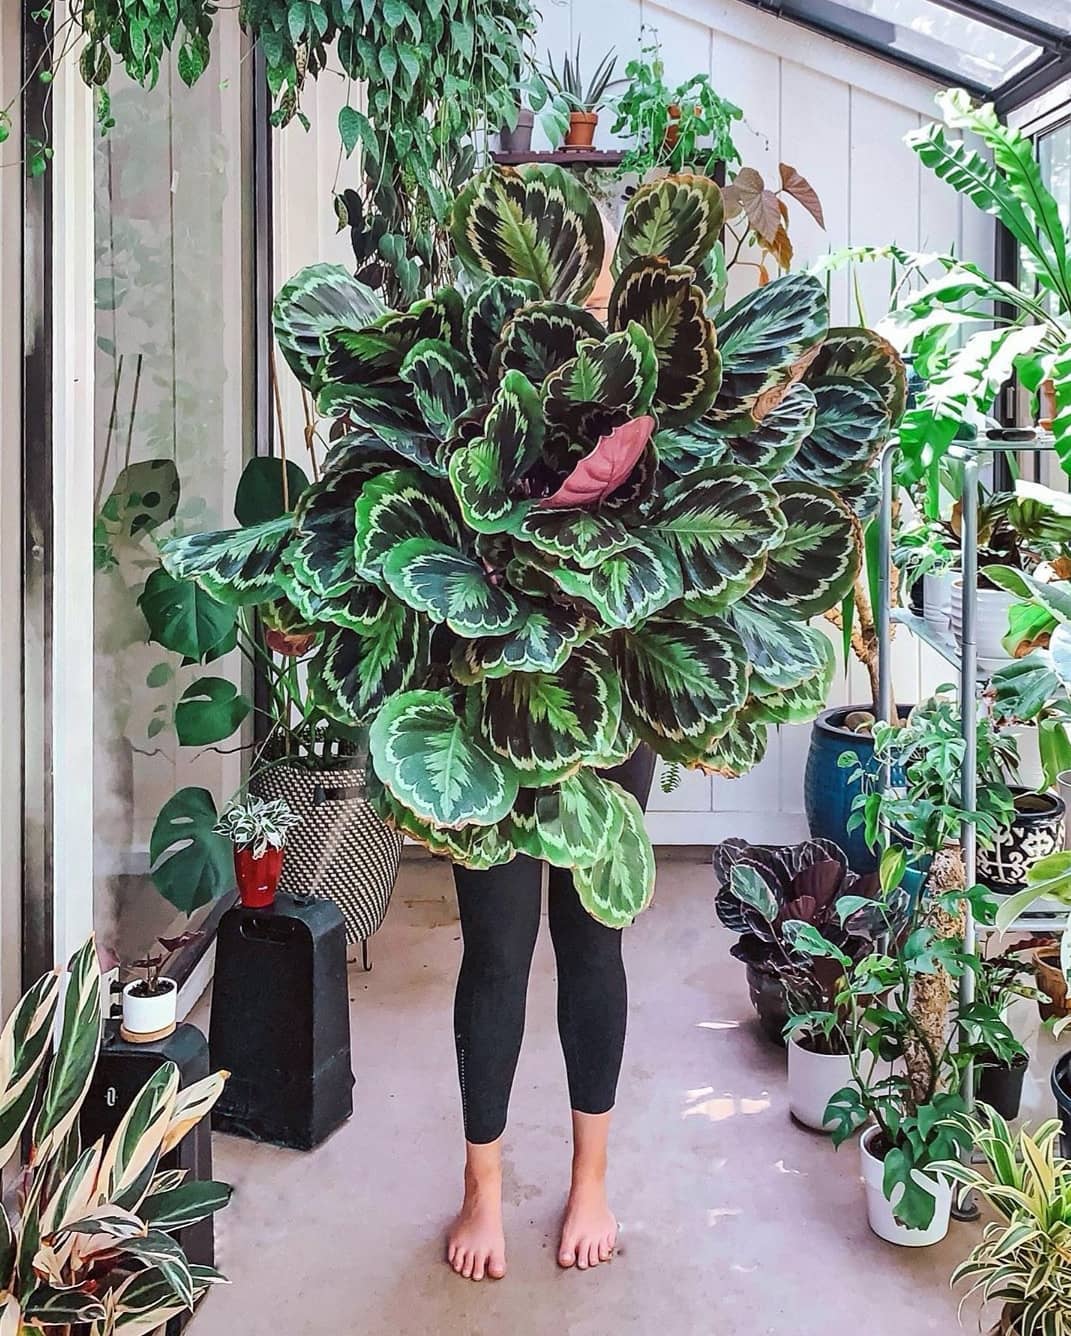 21 Lush Indoor Plants Ideas To Decorate Your Home   Decoholic